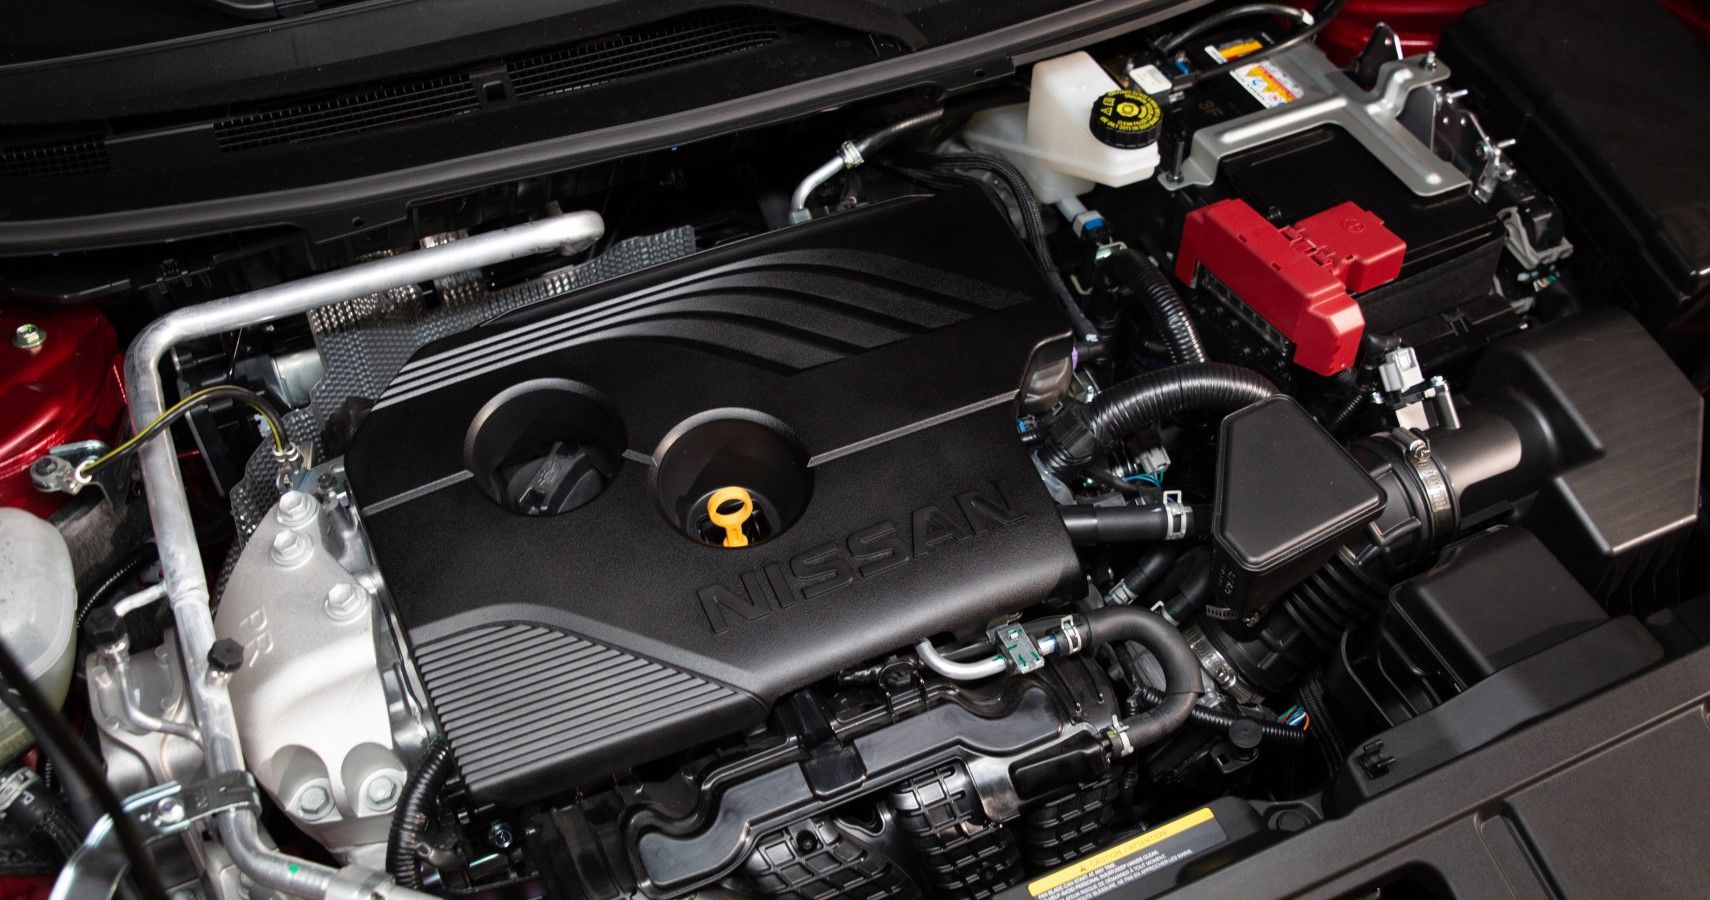 2021 Nissan Rogue engine bay view